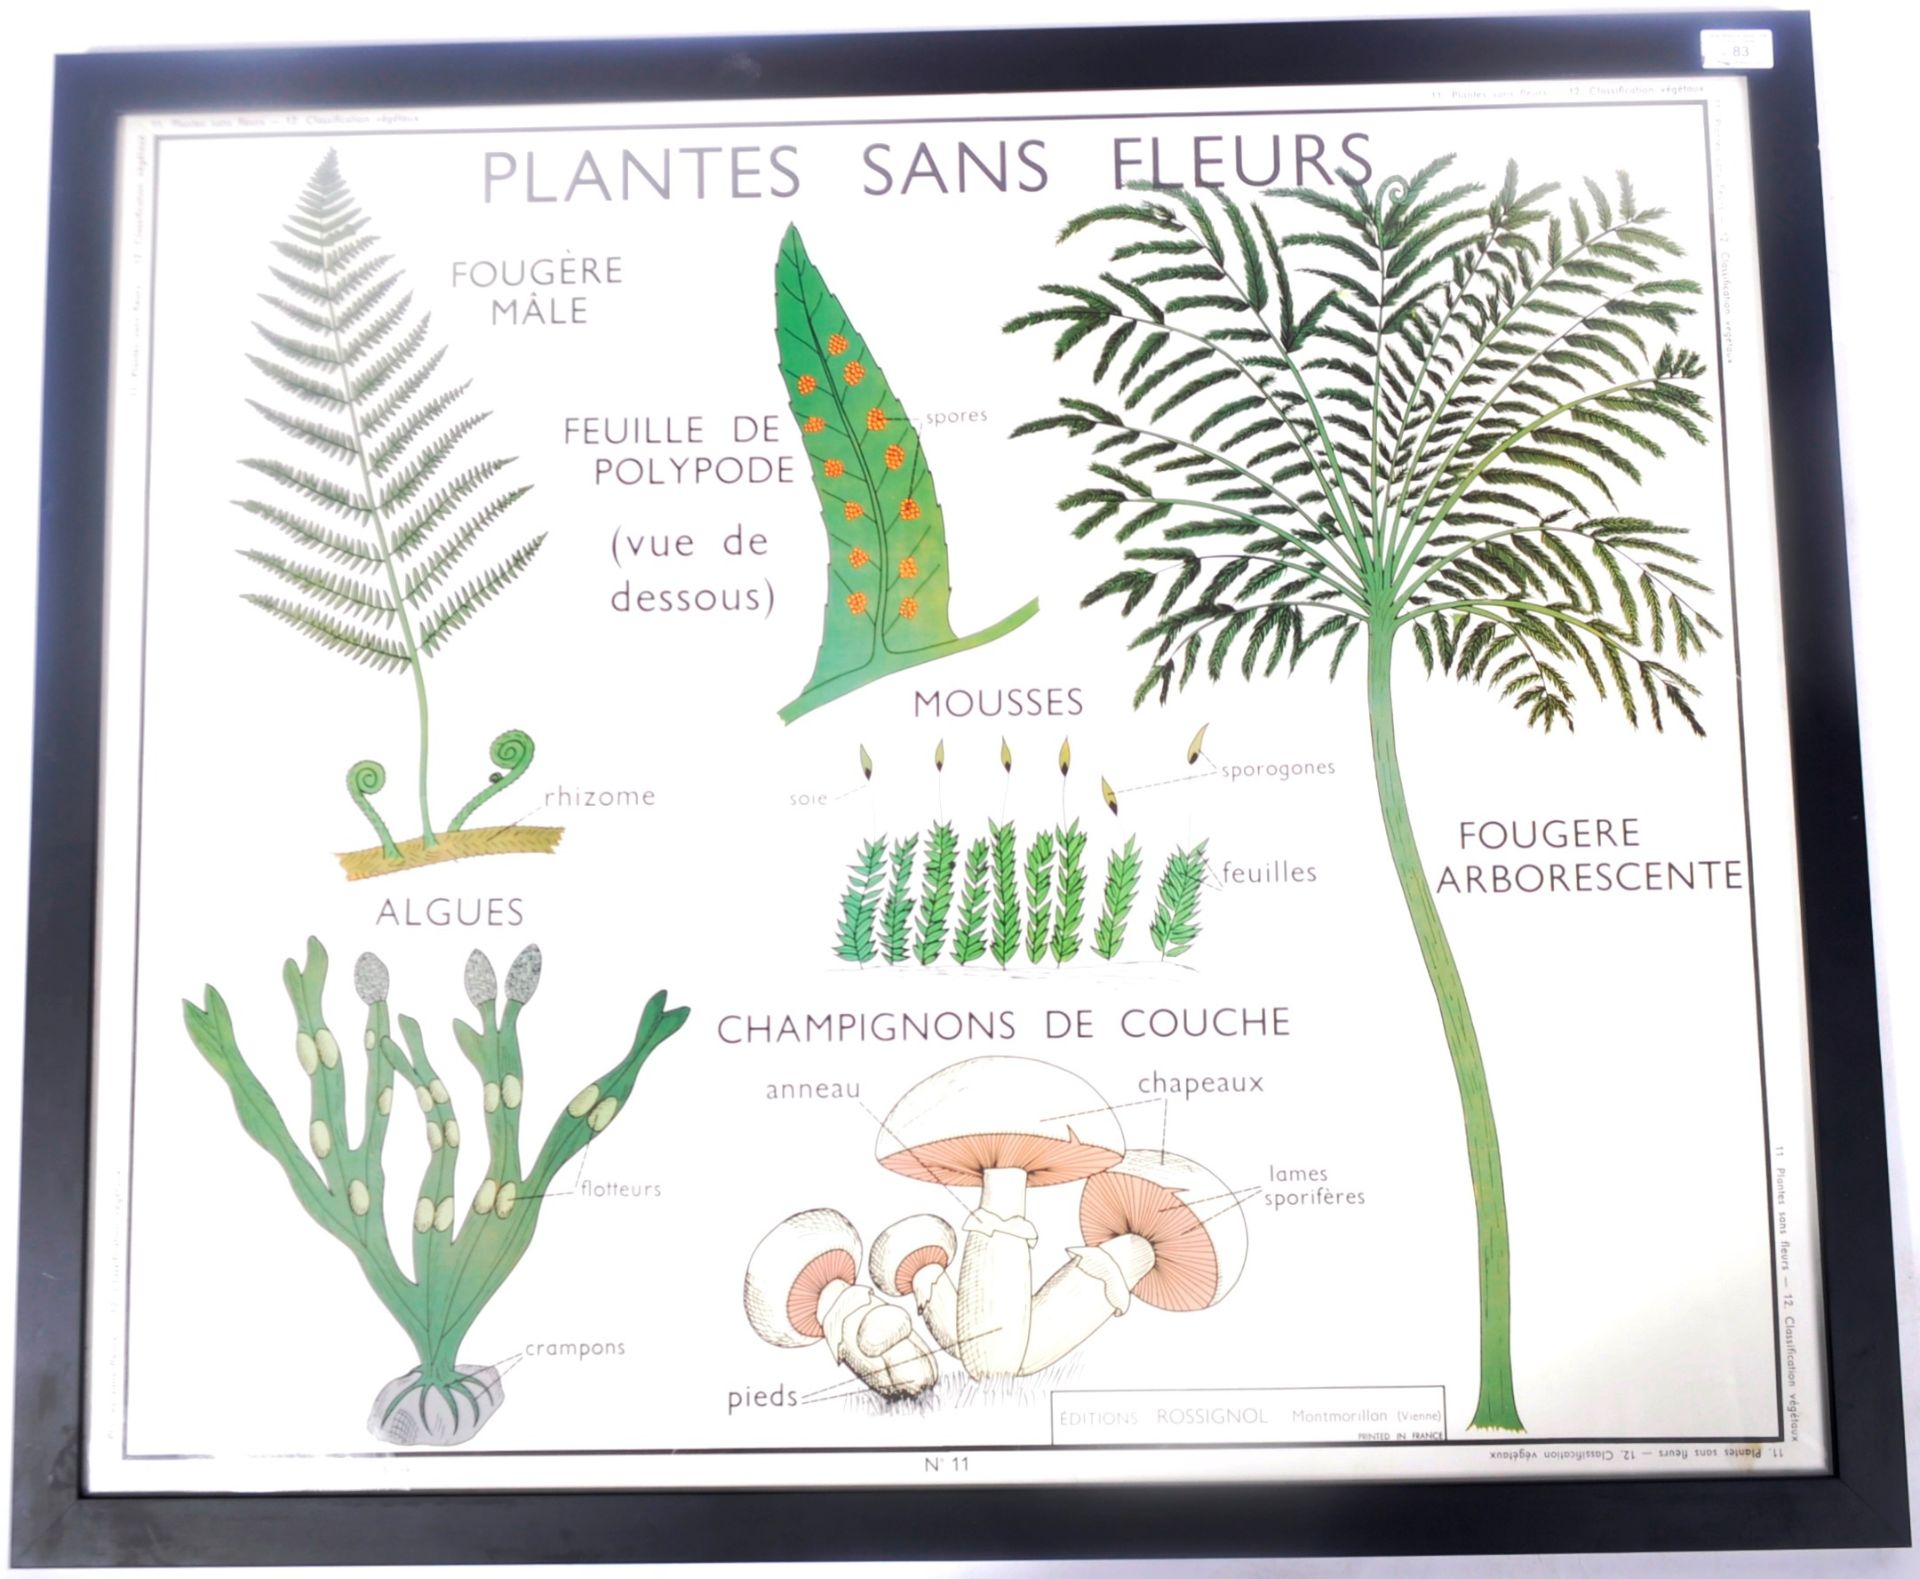 VINTAGE FRENCH FLOWERLESS PLANTS SCHOOL POSTER